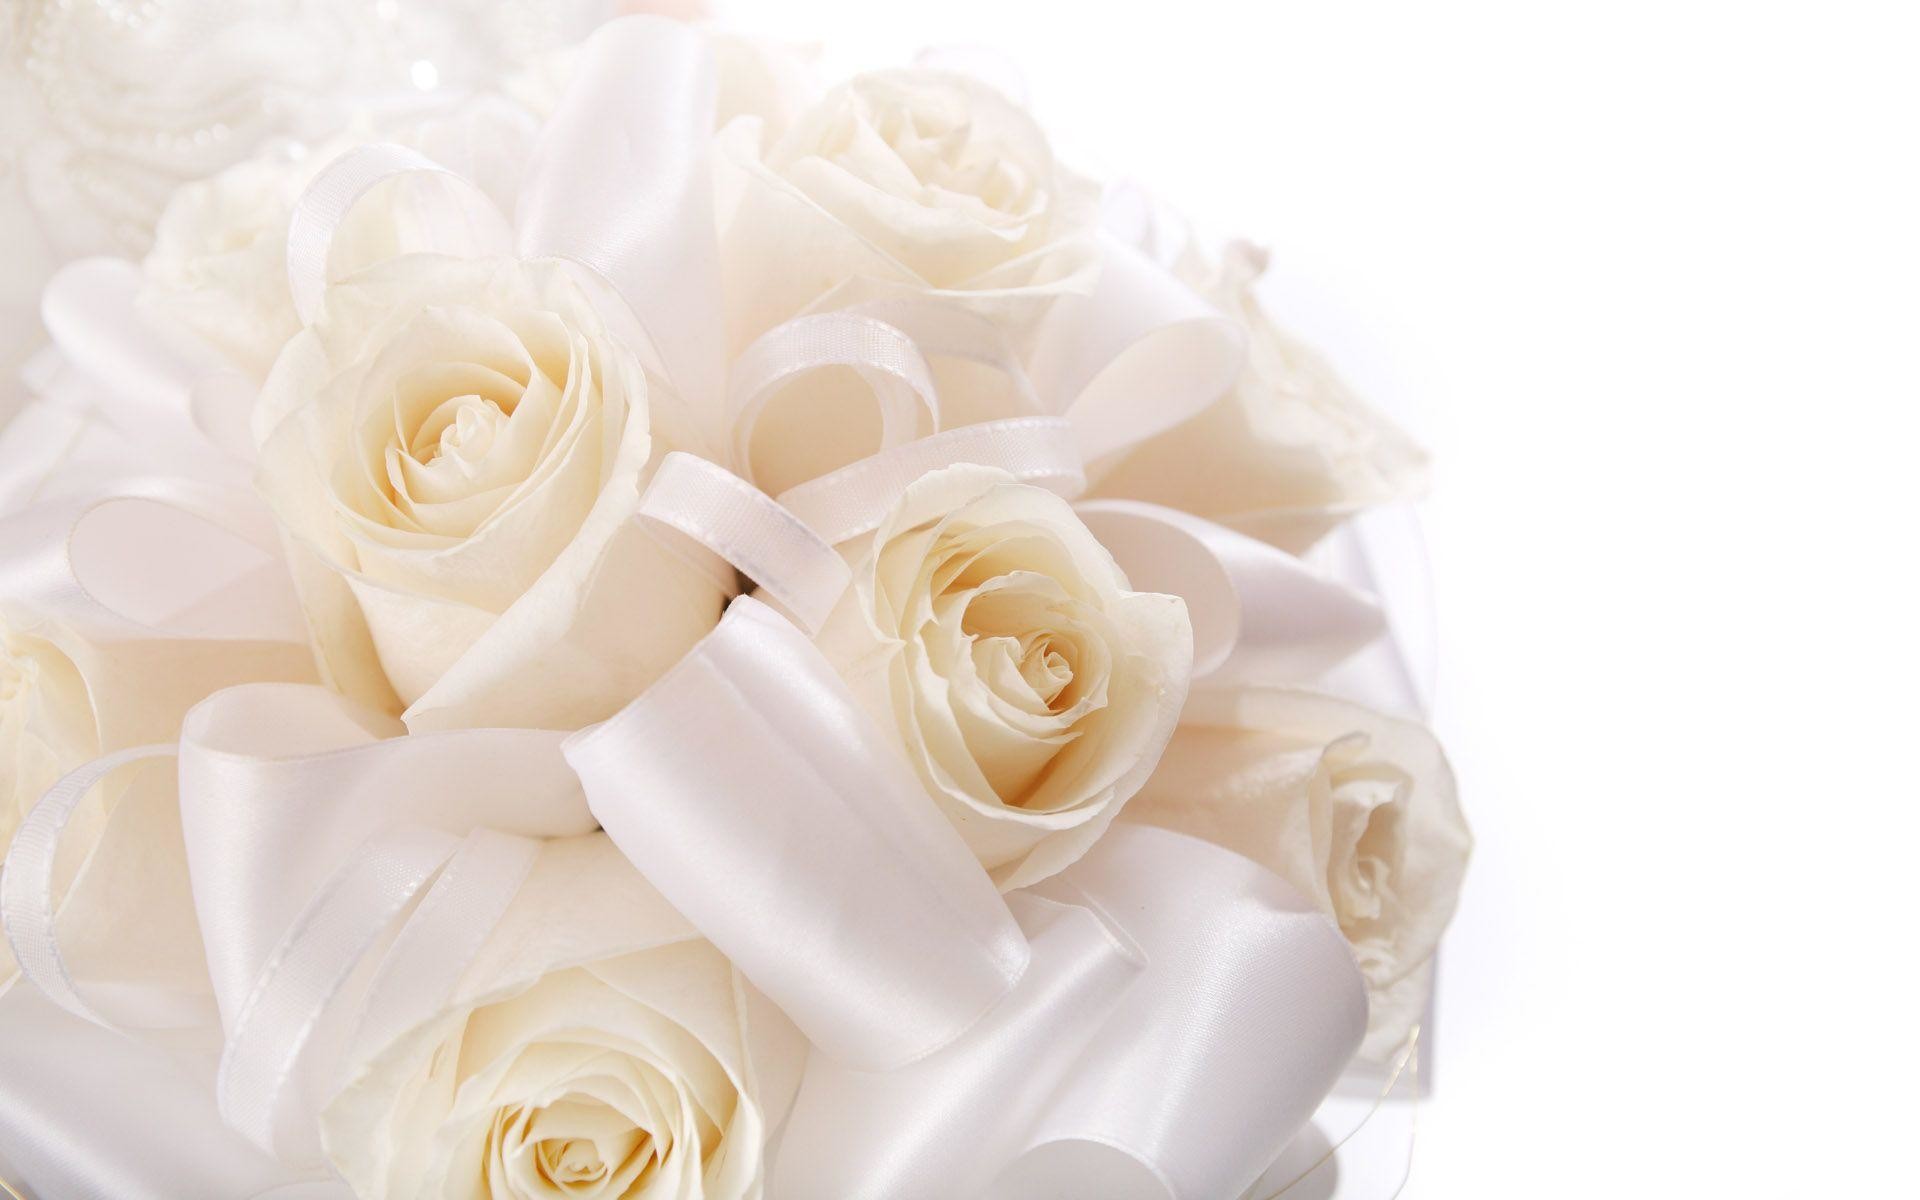 1920x1200 Most Downloaded Wedding Flowers Wallpapers - Full HD wallpaper search